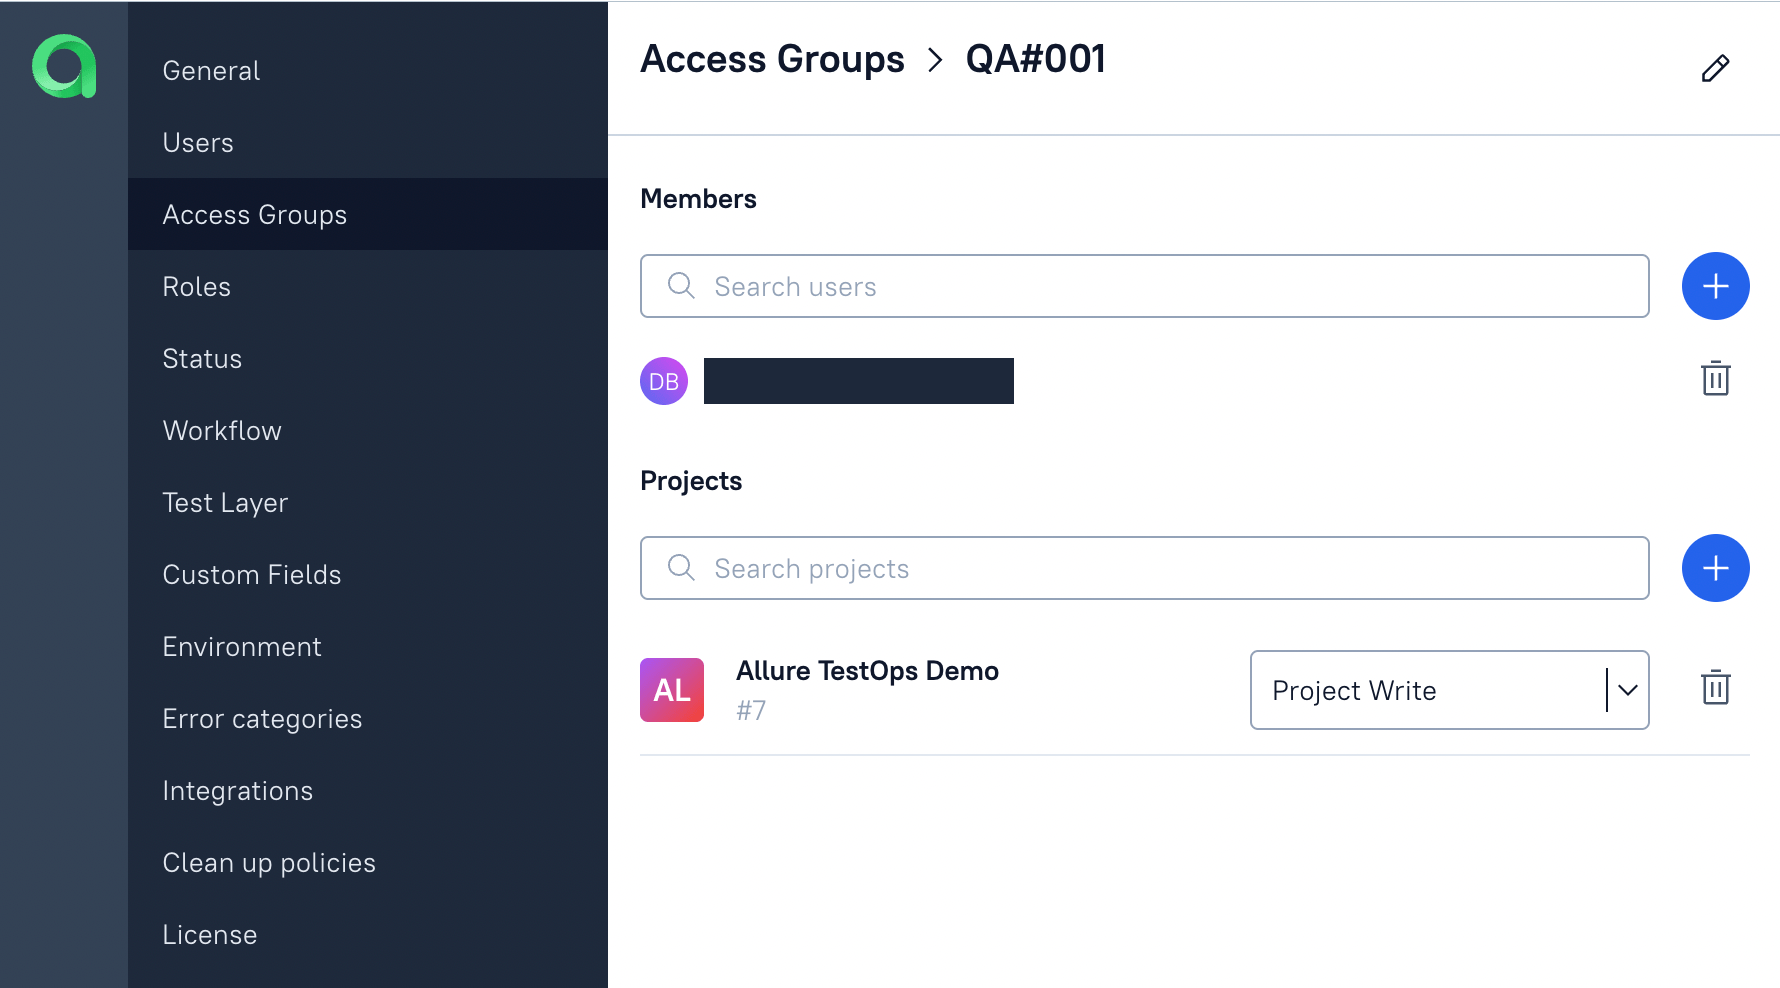 Adding project to group